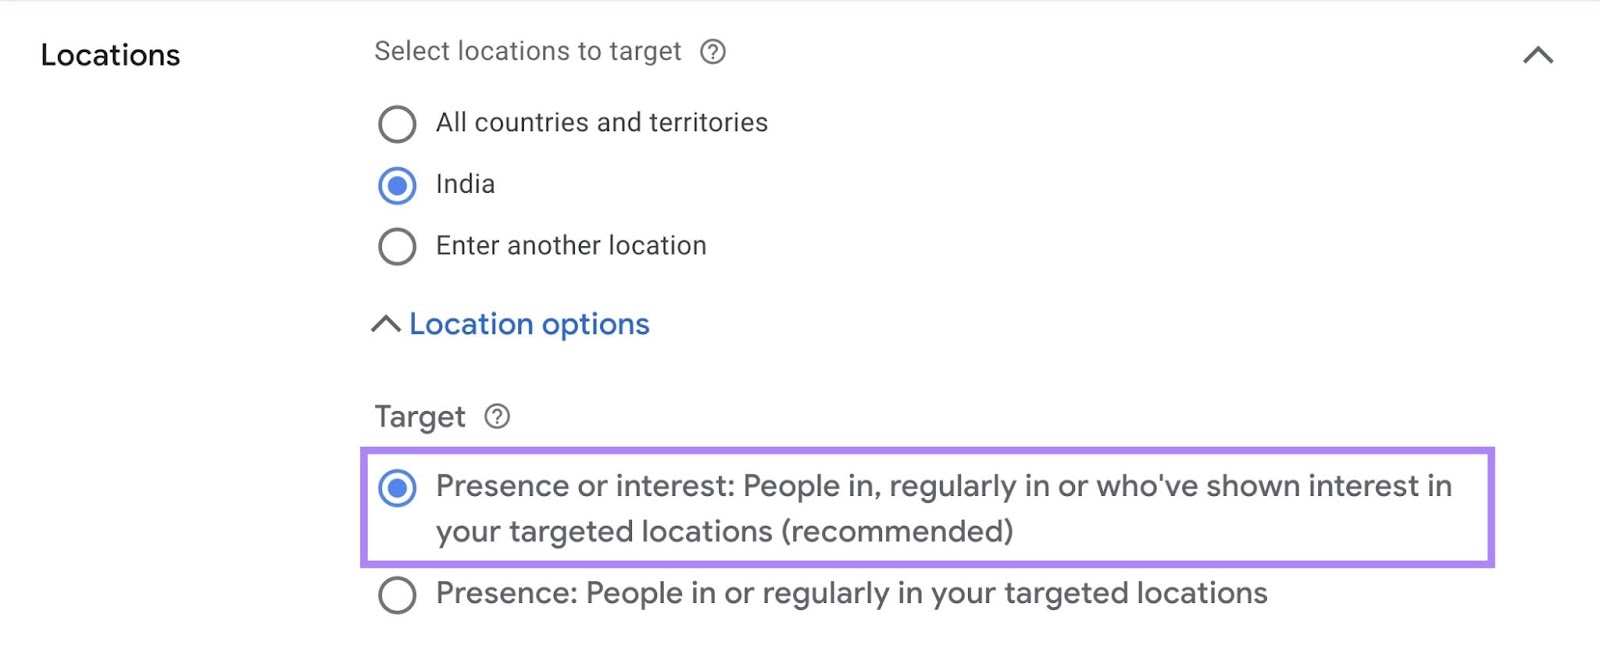 default geo-targeting setting in Google Ads is “Presence or interest: People in, regularly in, or who've shown interest in your targeted locations"